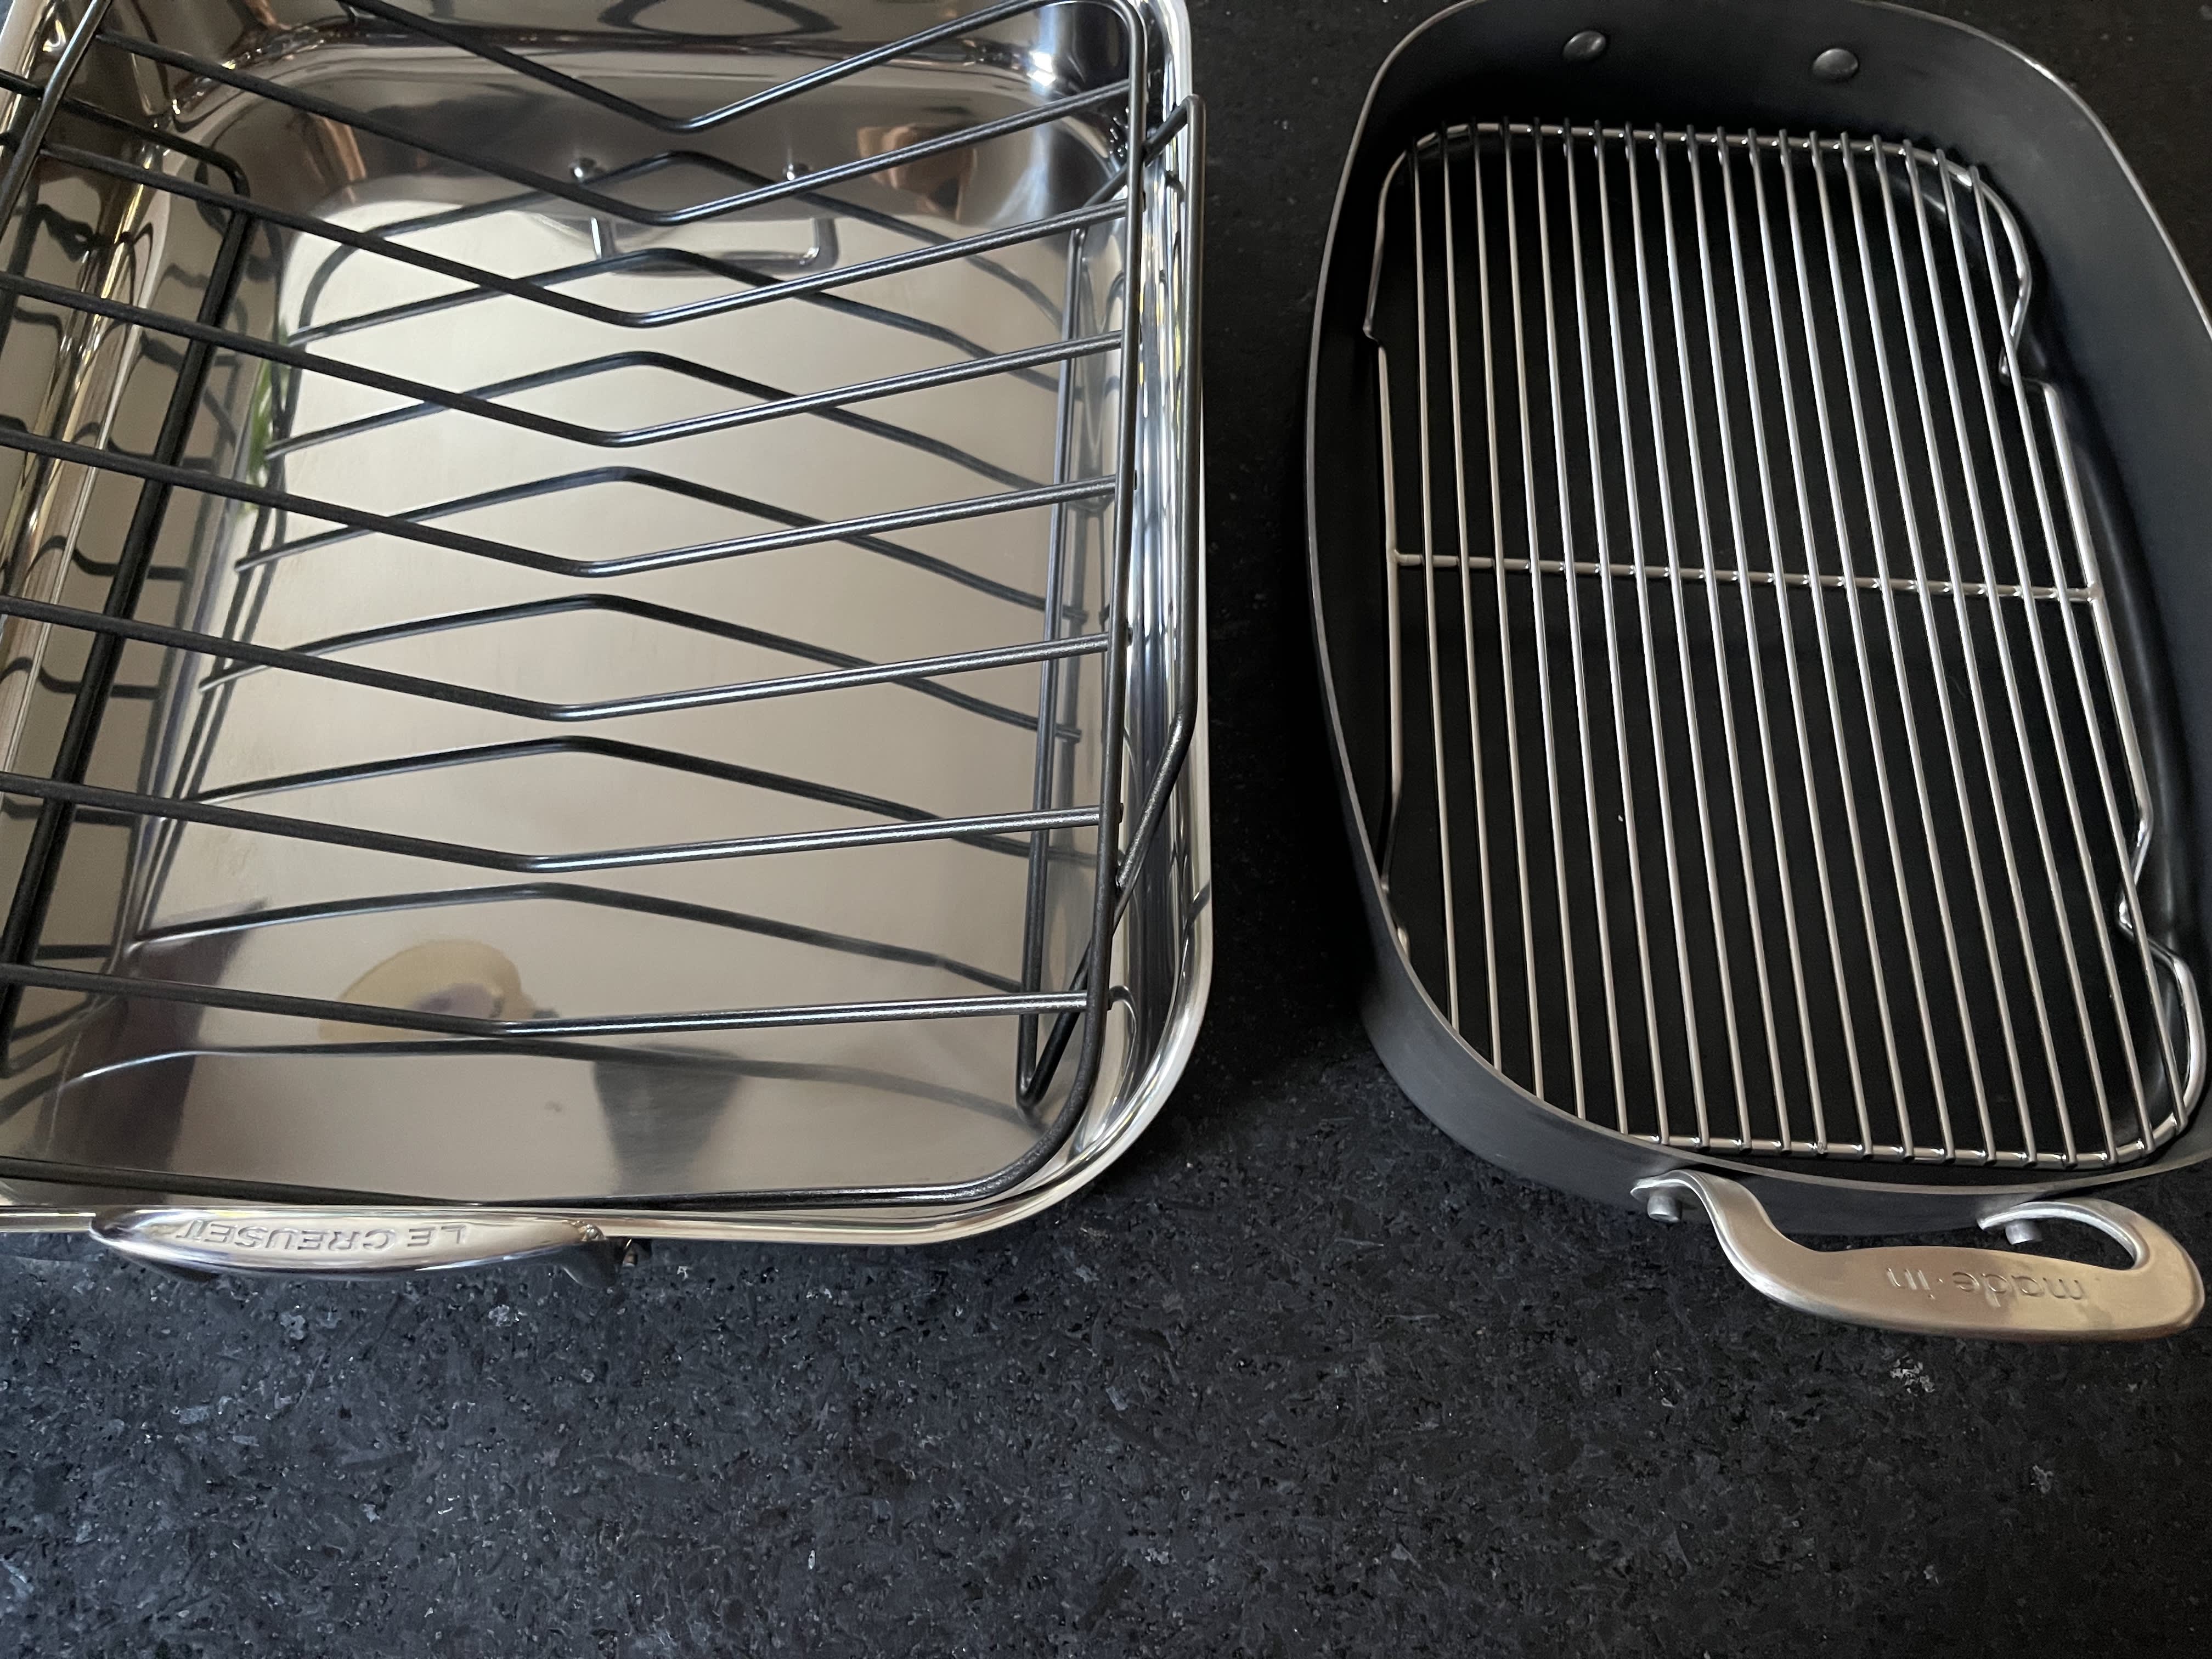 The Best Roasting Pans, According to the Pros